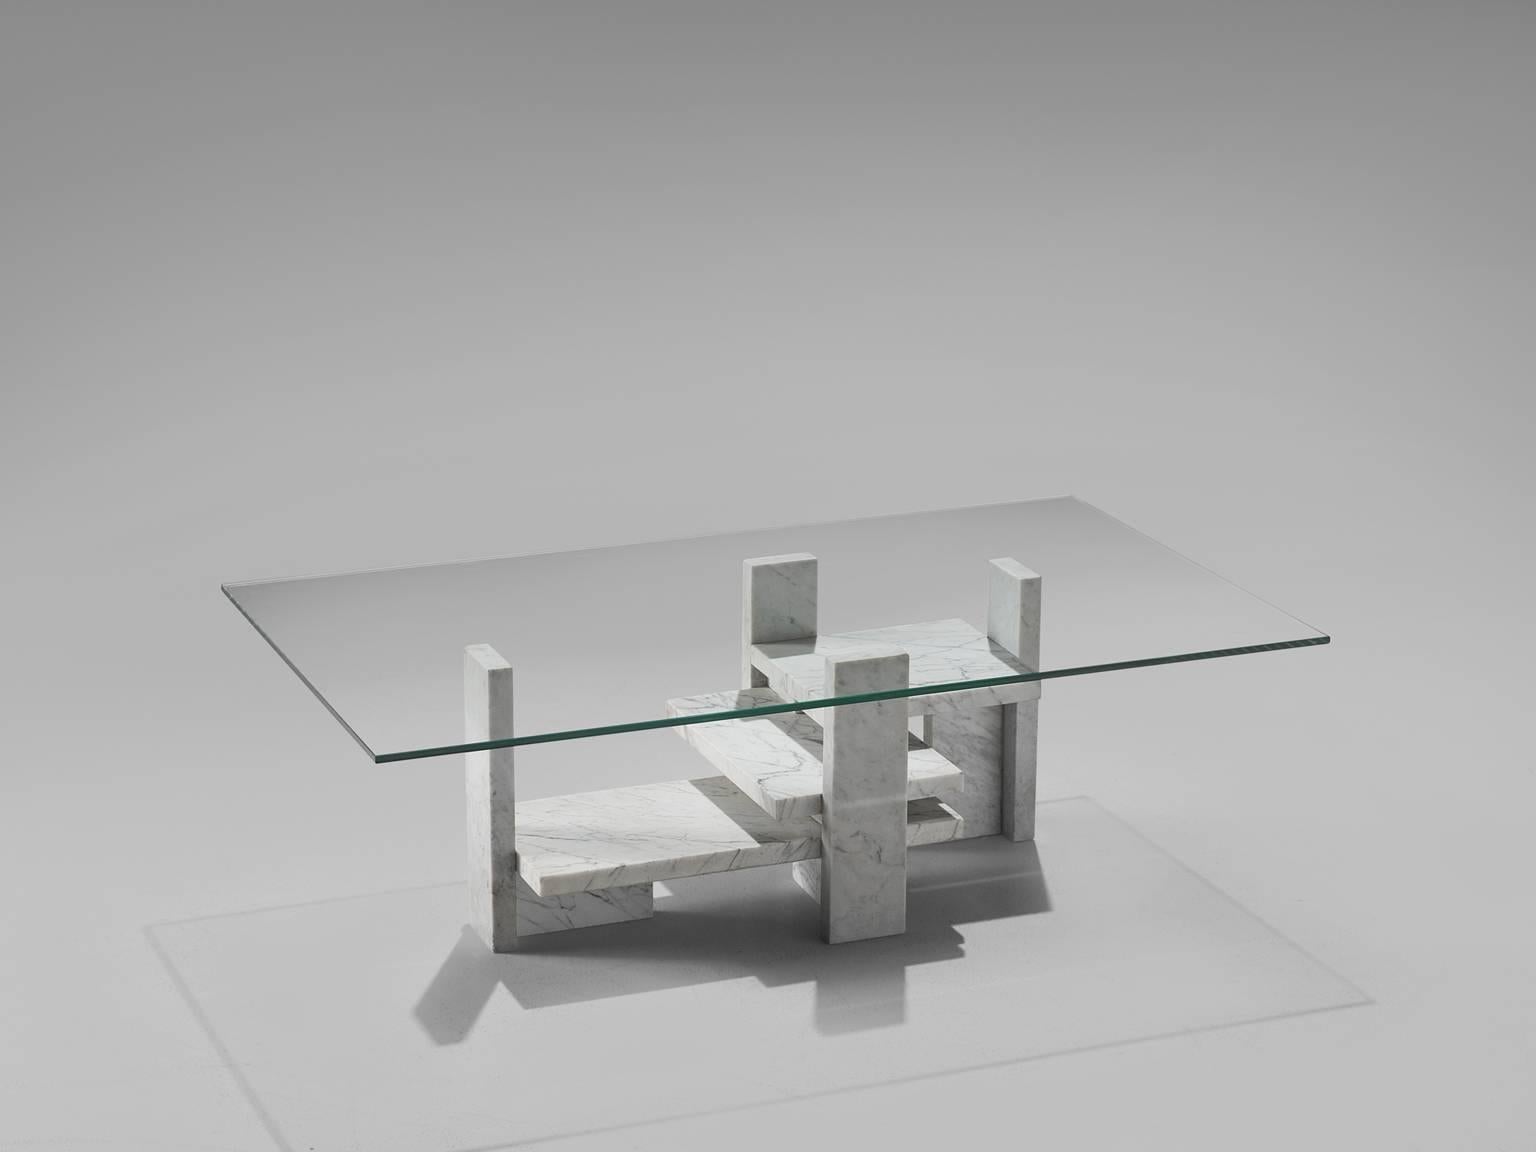 Coffee table, marble, Italy, 1970s. 

This sculptural table is a skillful example of postmodern design. The glass and marble table is architectural in its design. The rectangular table top is executed in glass. As a result, the sculptural,